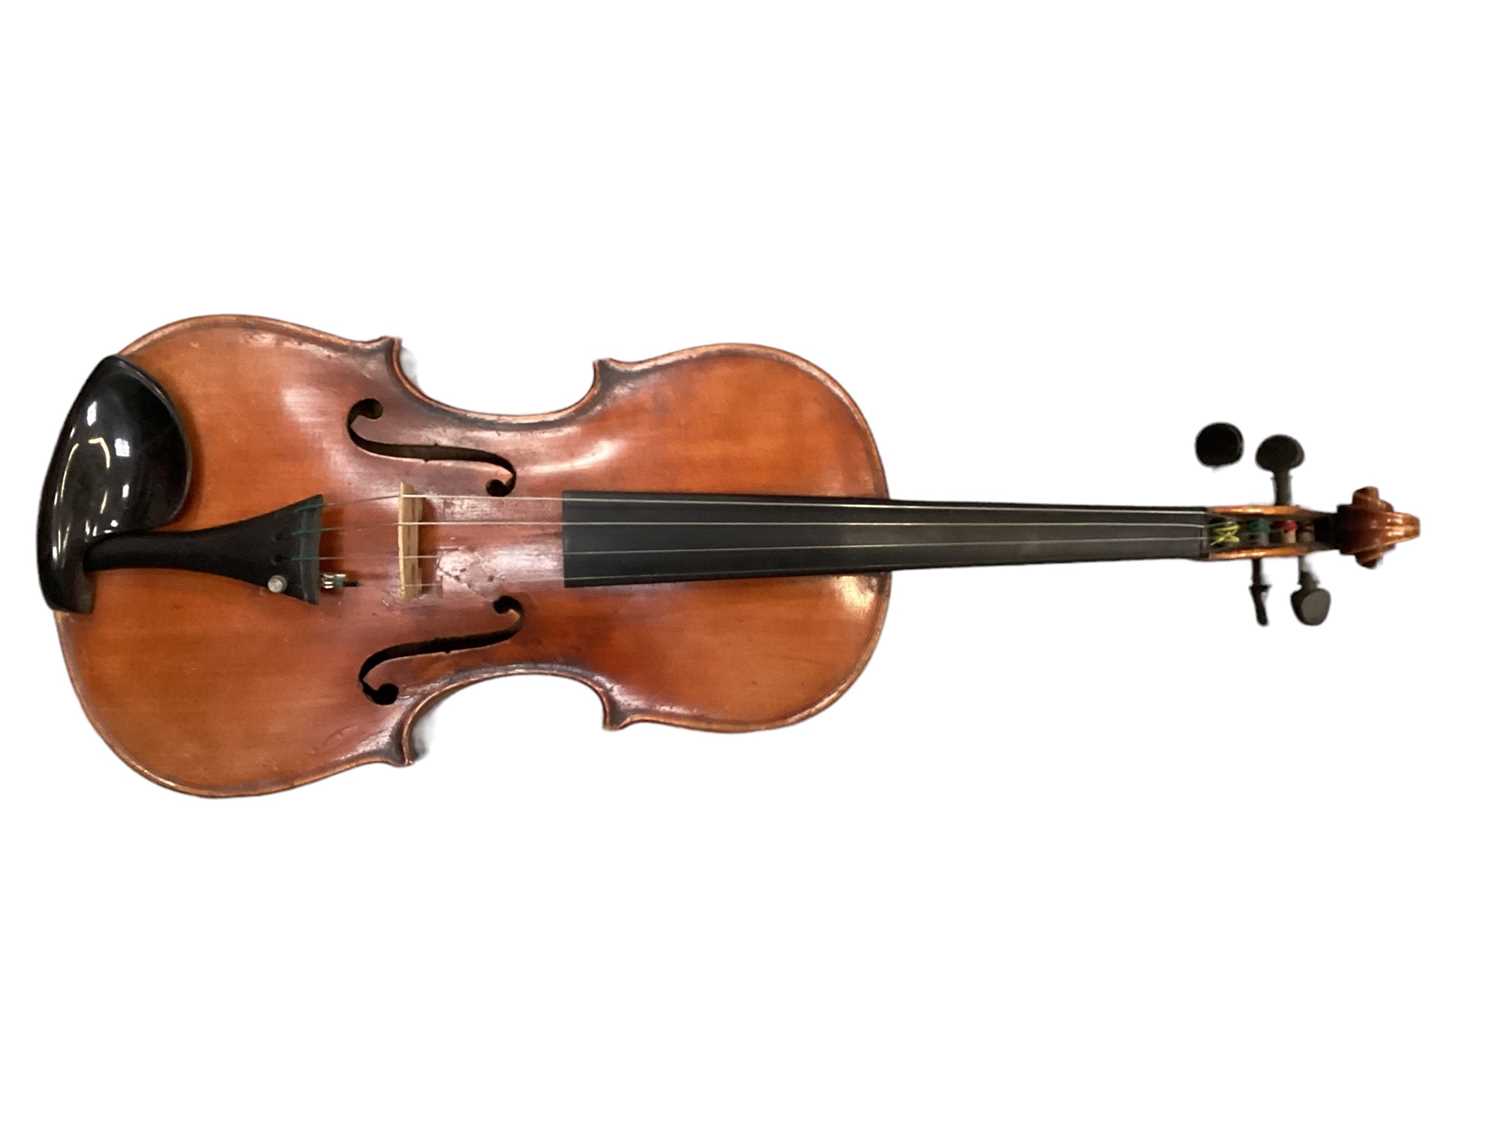 Lot 2231 - Vintage violin with two bows and wooden case